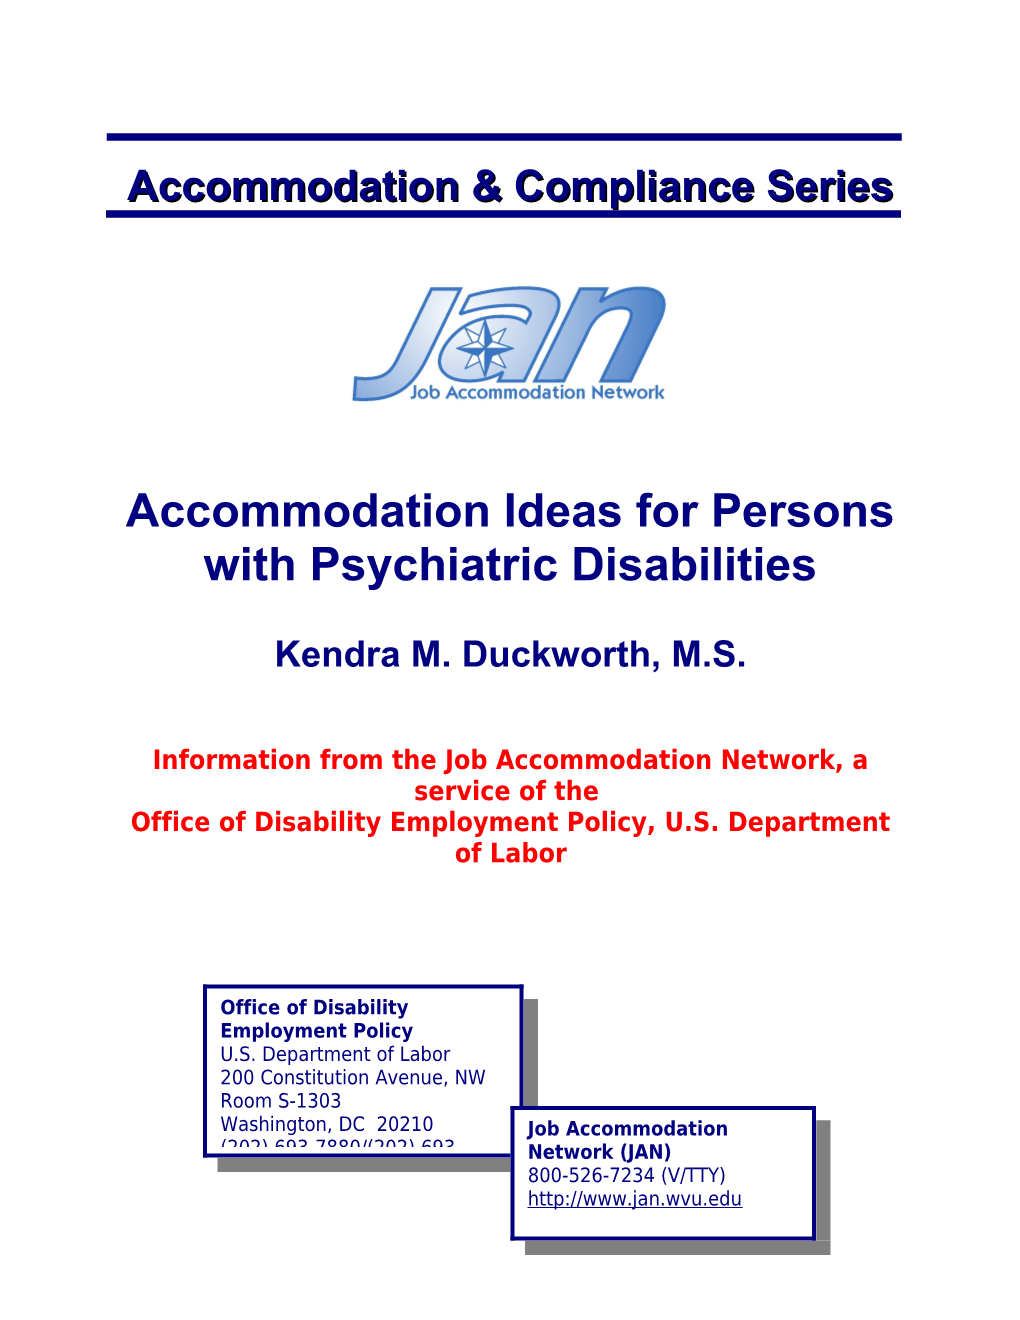 Accommodation Ideas for Persons with Psychiatric Disabilities